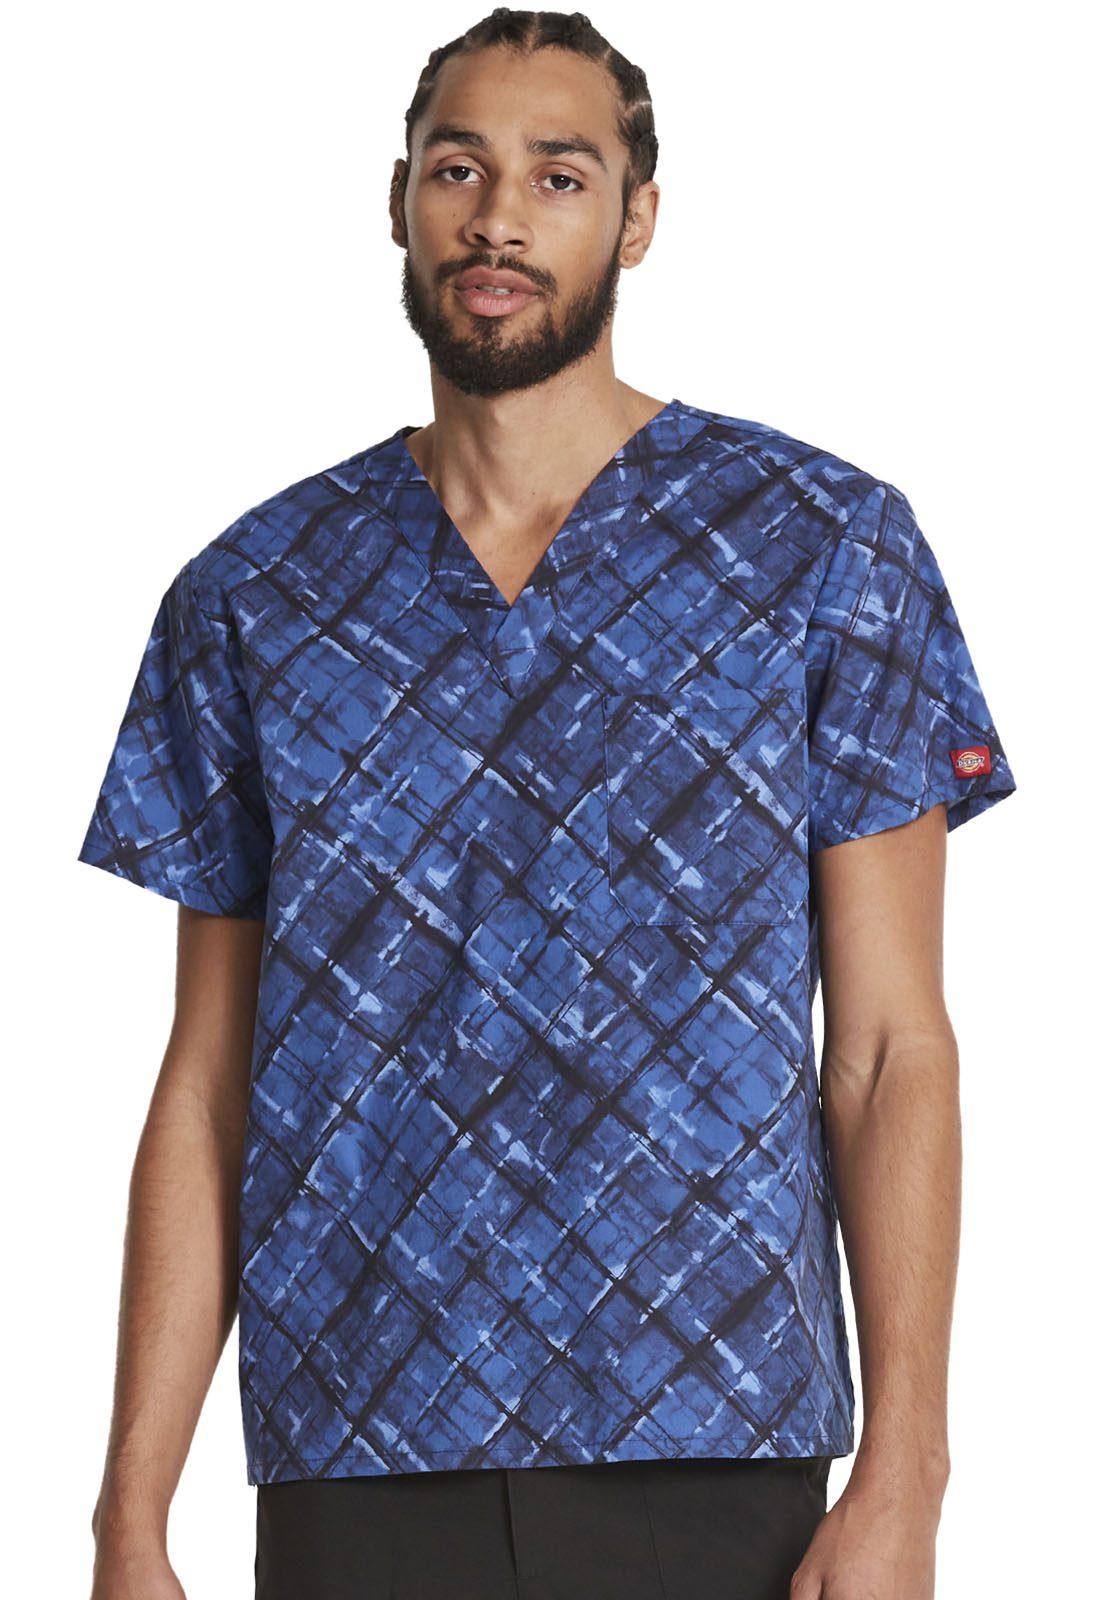 Men's V-Neck Top in Painterly Plaid